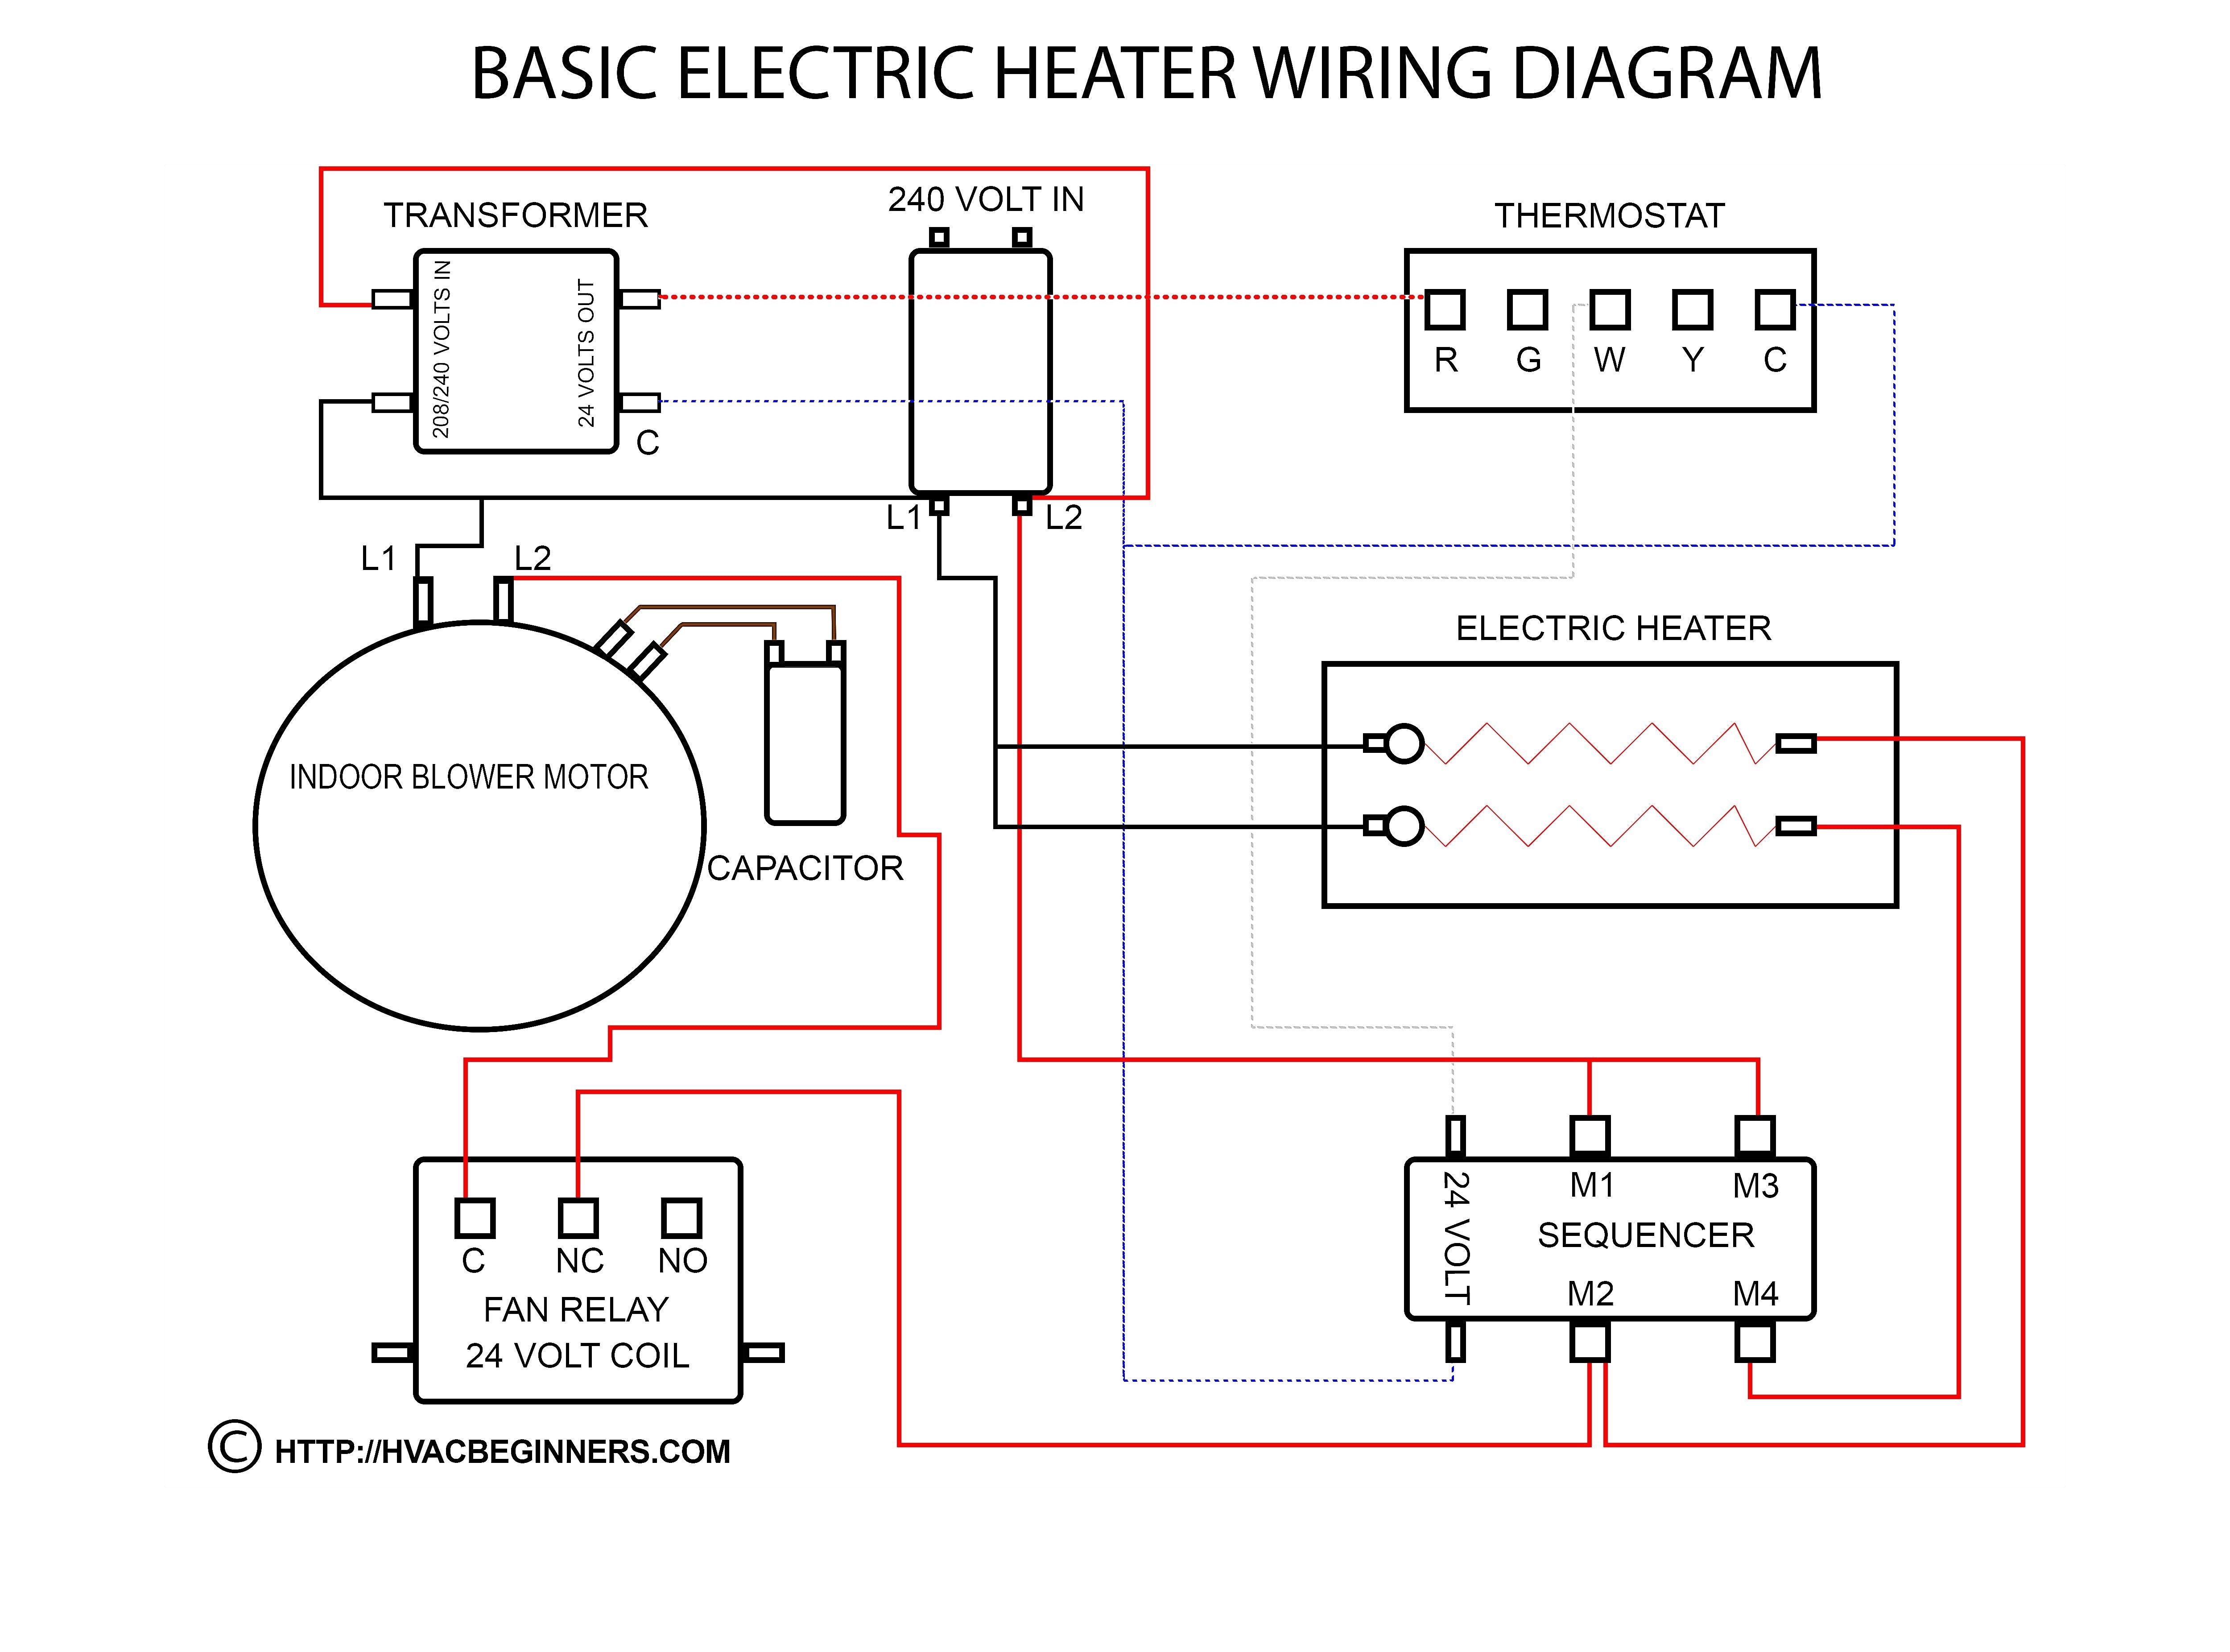 Dometic thermostat Wiring Diagram Frigidaire thermostat Wiring Diagram Easy Rules Wiring Diagram • Of Dometic thermostat Wiring Diagram